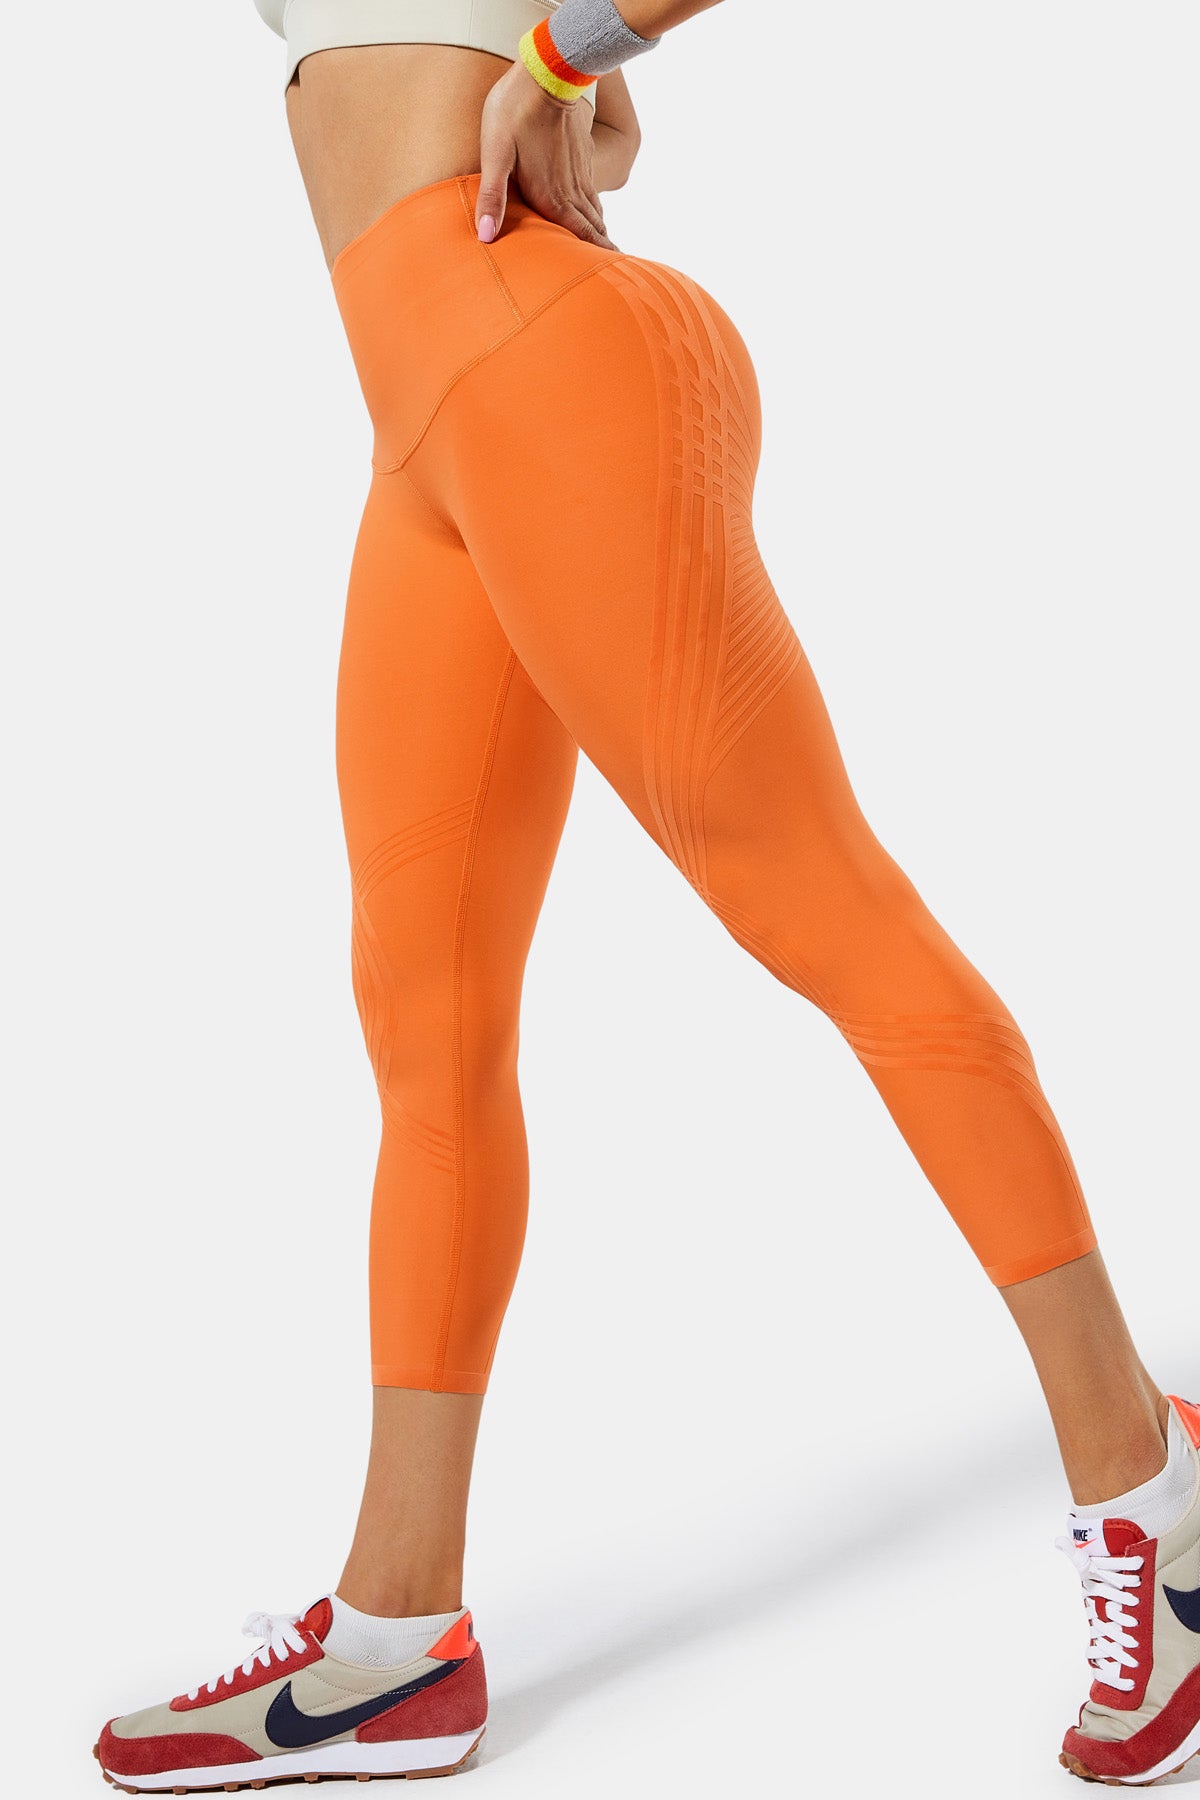 These Body Sculpting Leggings Designed For Thick Thighs And